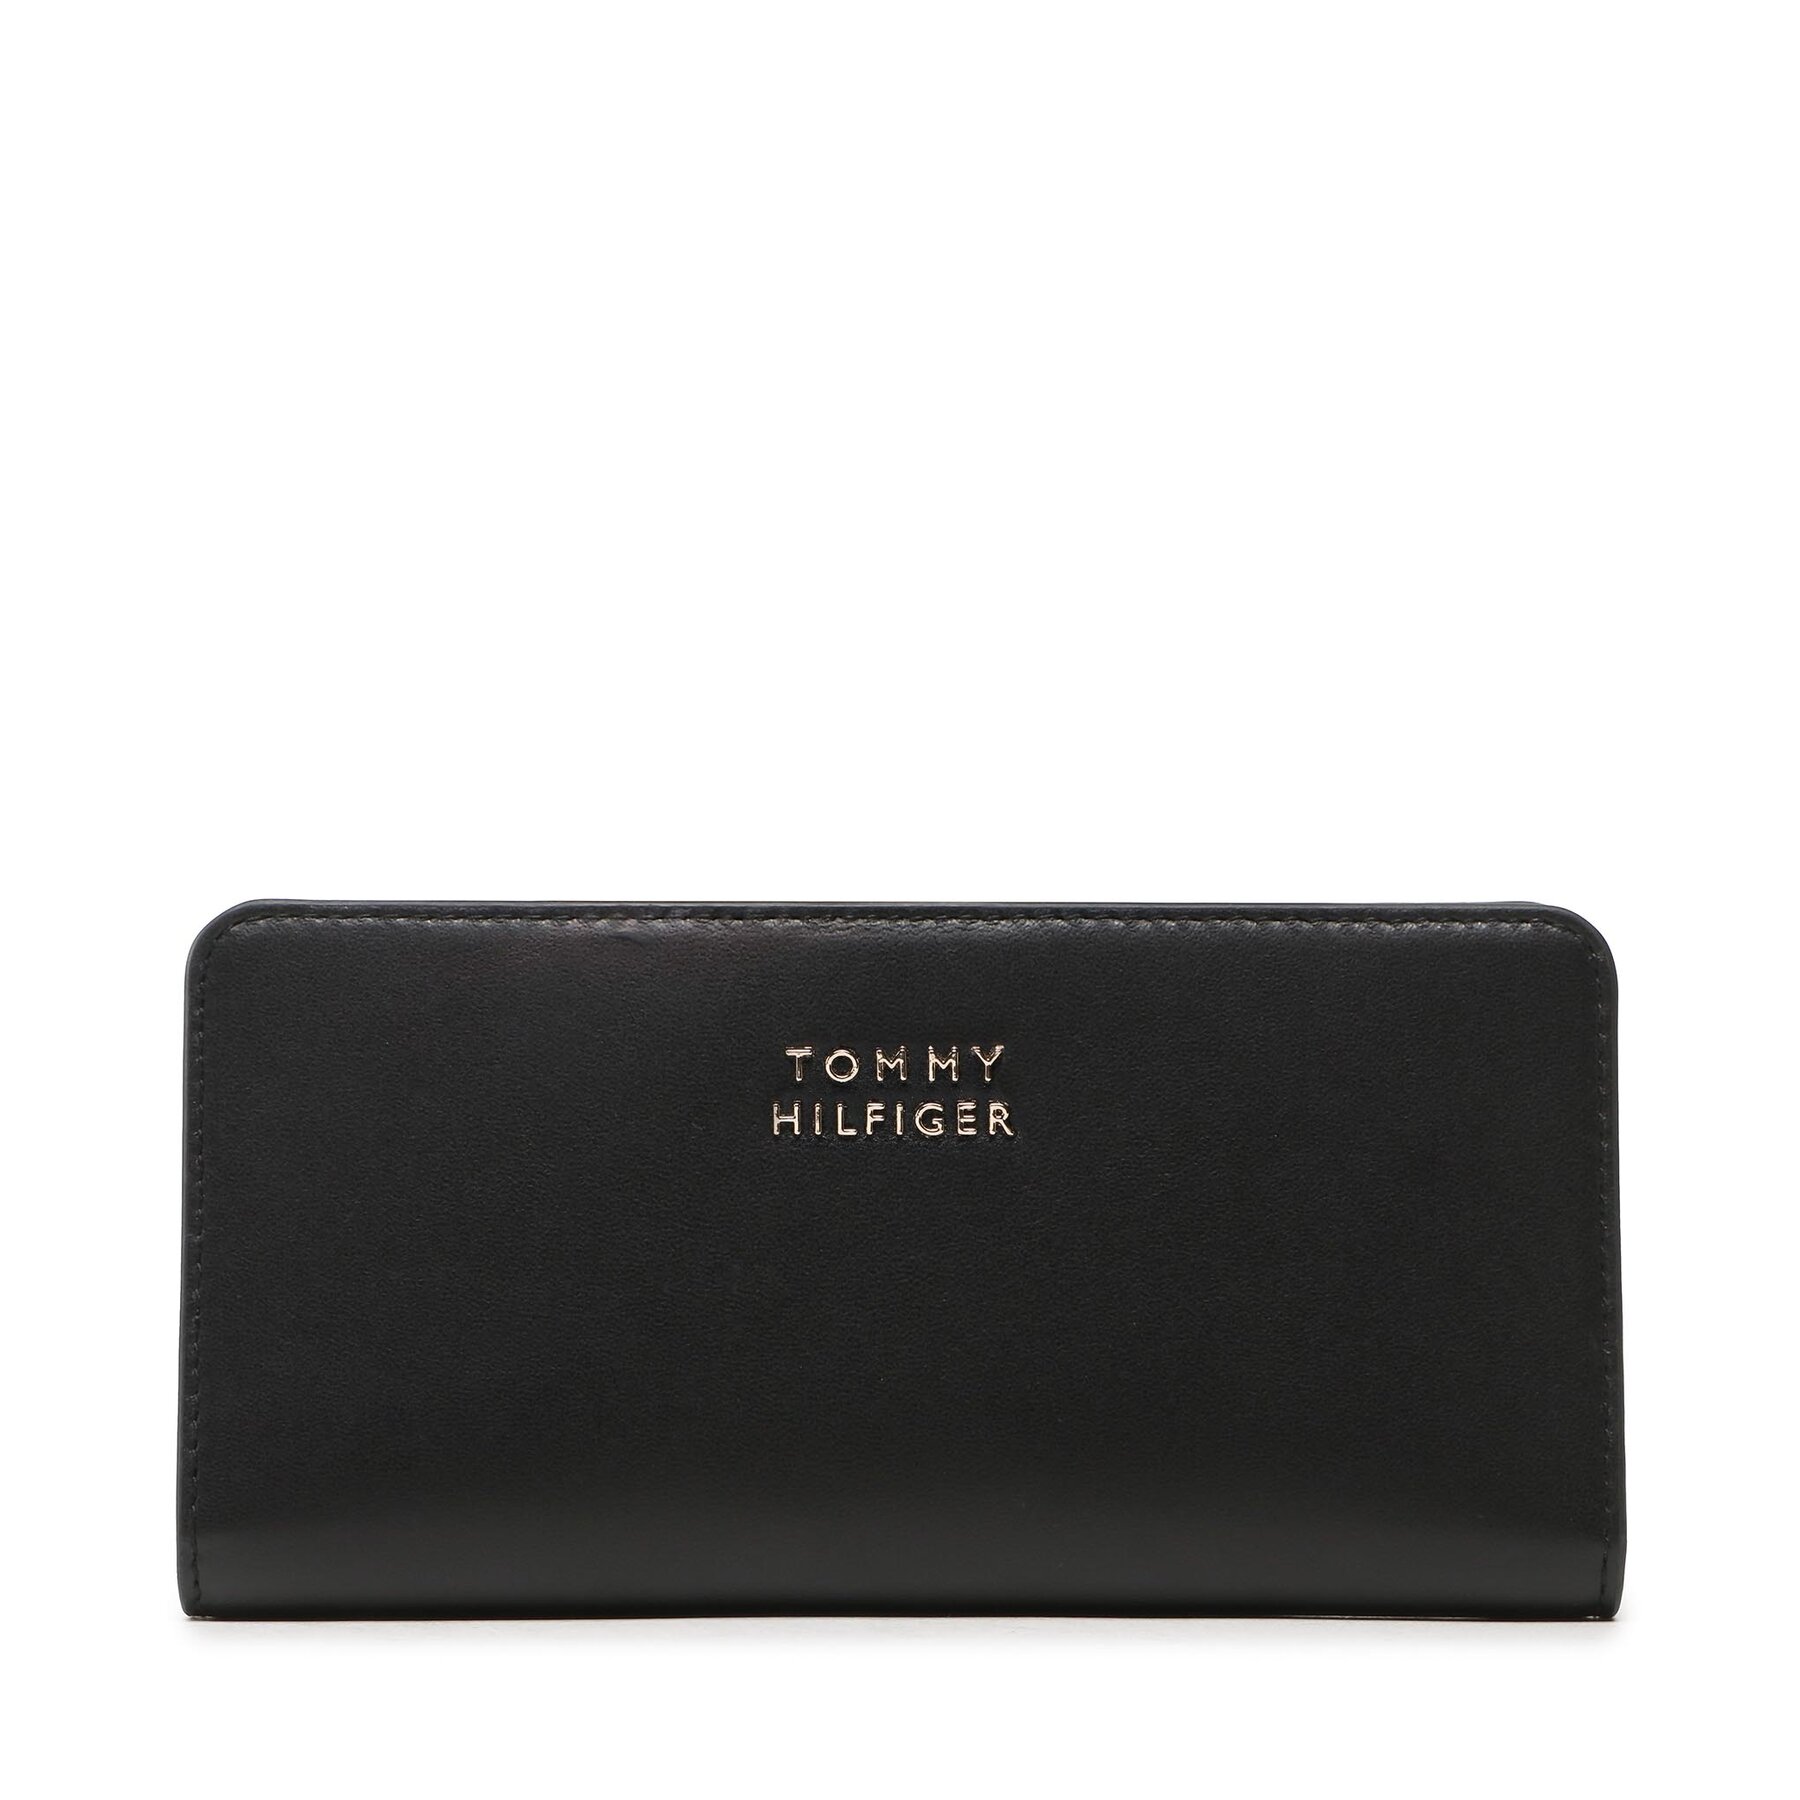 Portofel Mare de Damă Tommy Hilfiger Casual Chic Leather Large Wallet AW0AW14916 BDS AW0AW14916 imagine super redus 2022